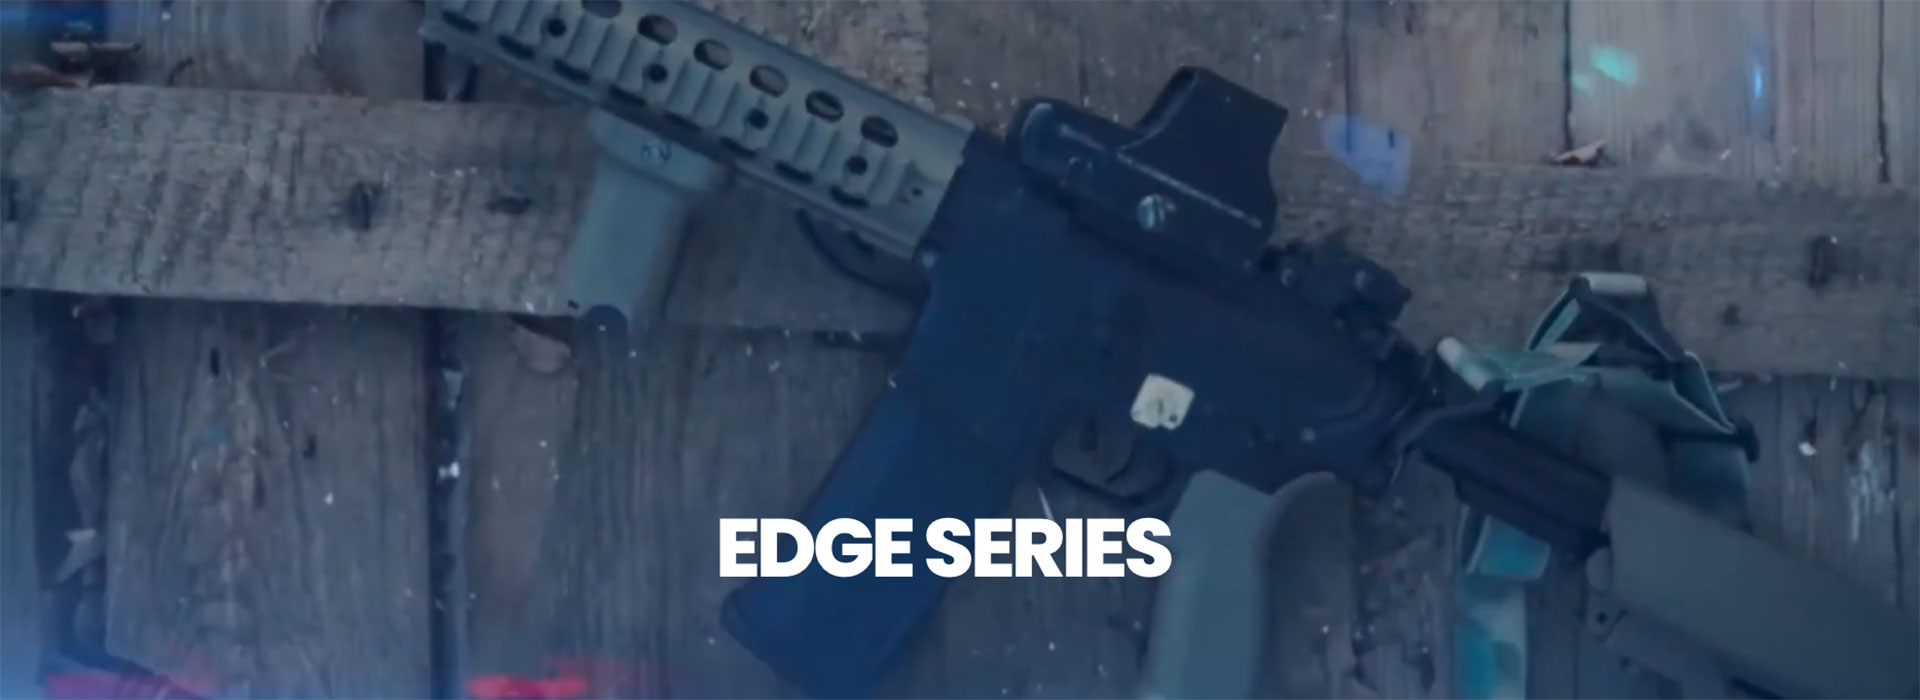 Edge Series from Specna Arms Airsoft